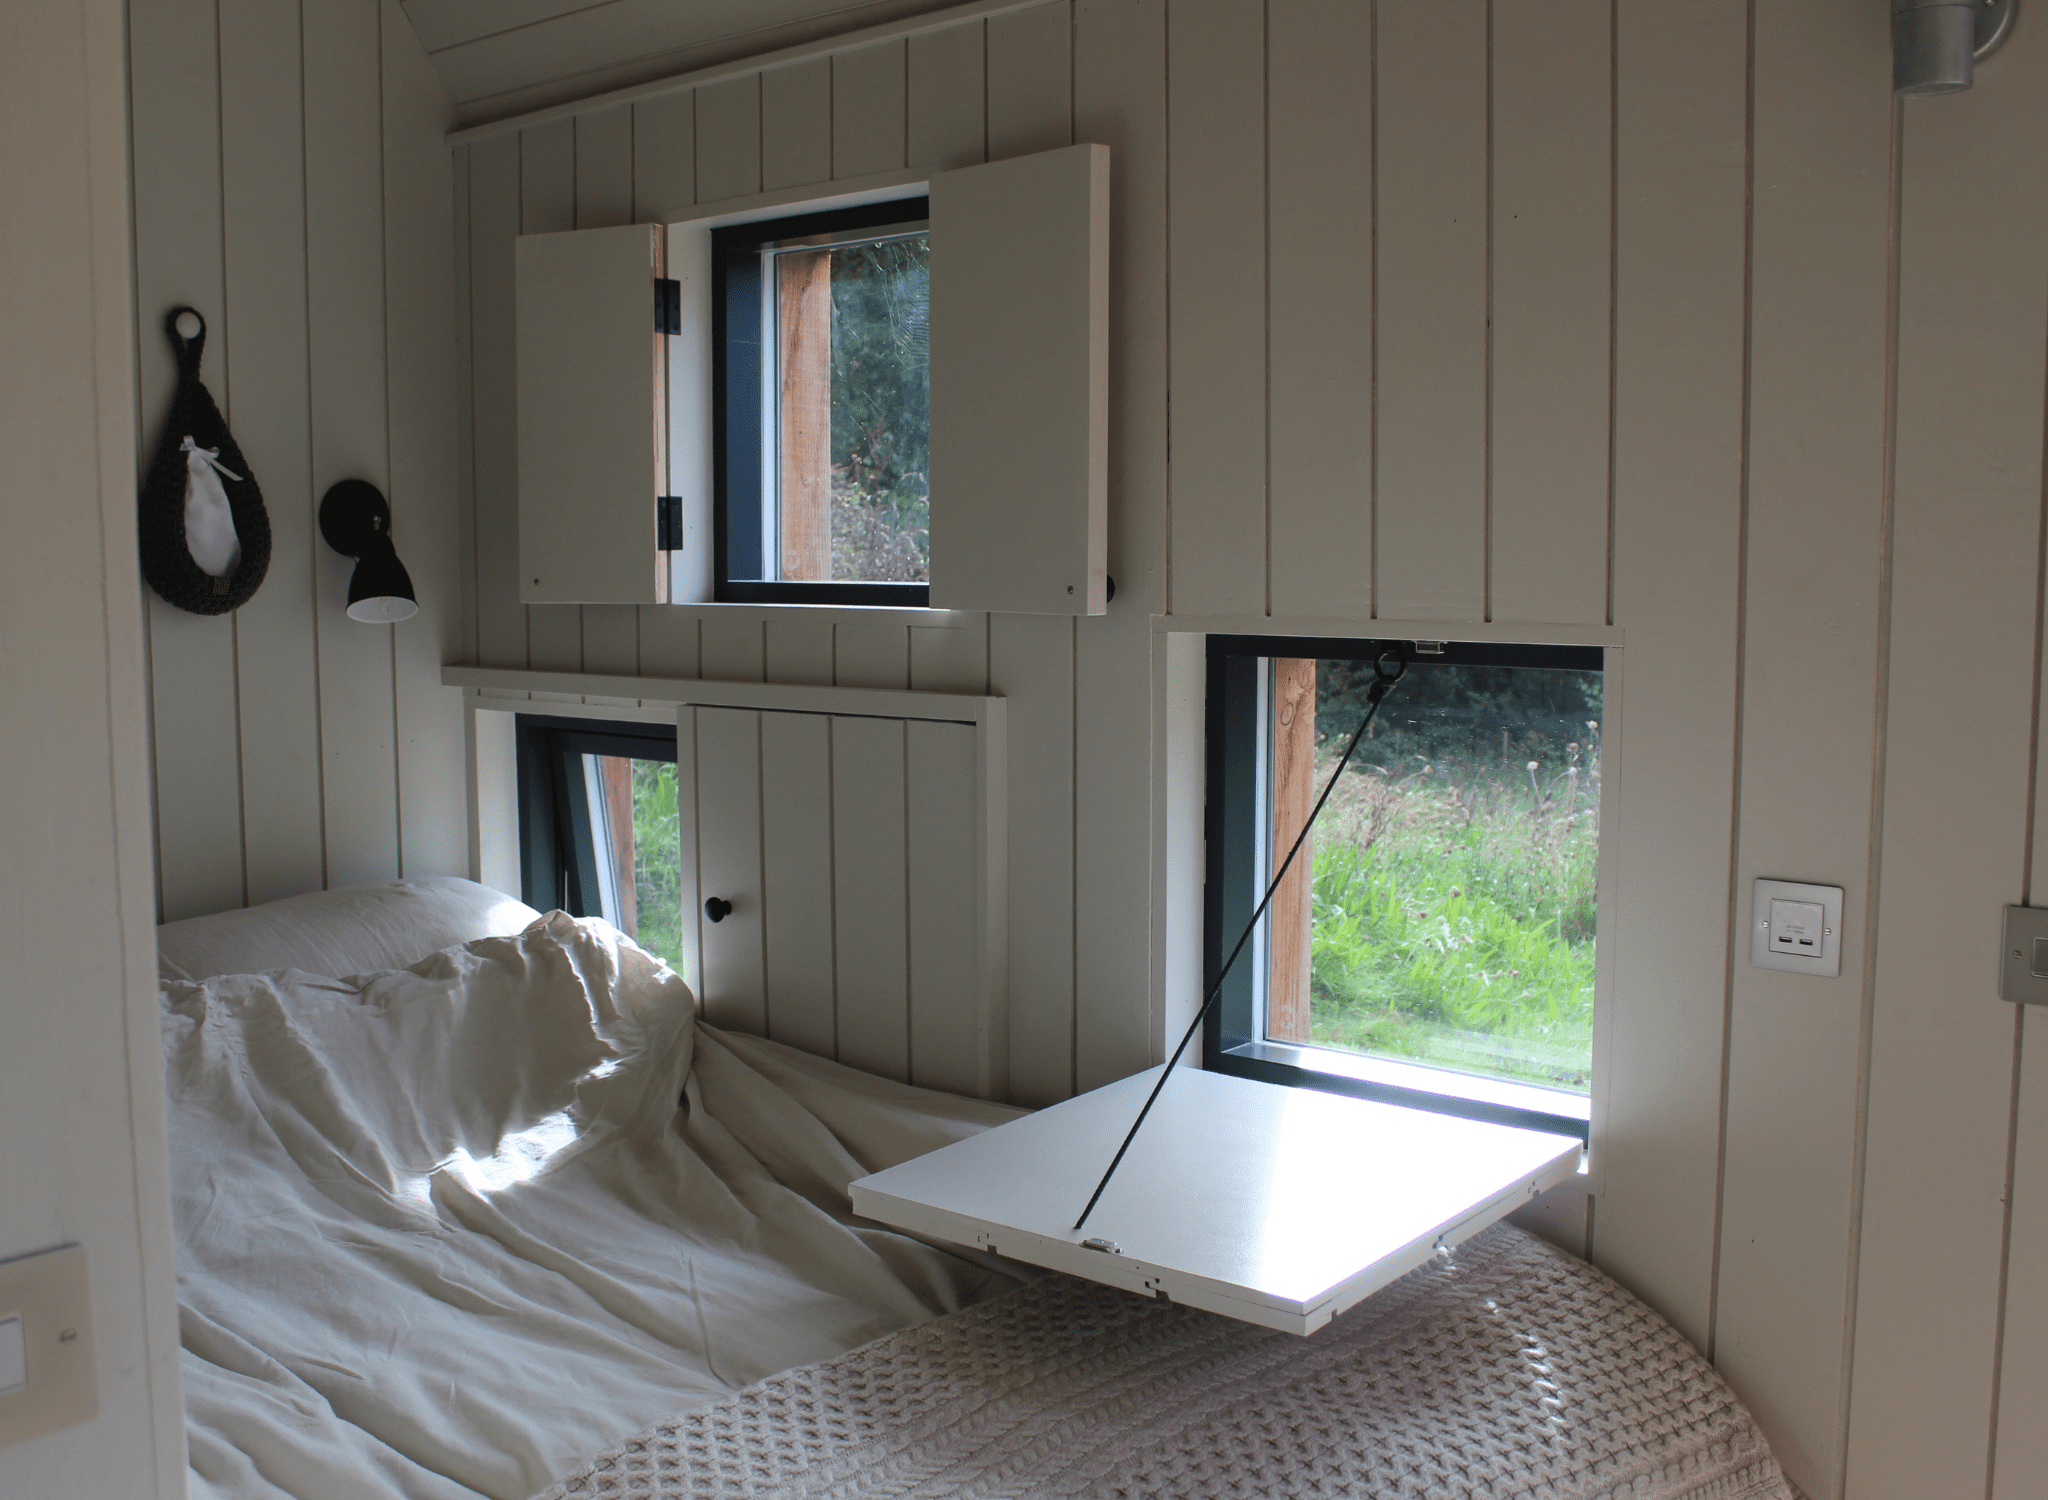 Bespoke Holiday cabin rental. Bespoke peekaboo shutters for this Dart cabin. Design and build by Life Space Cabins